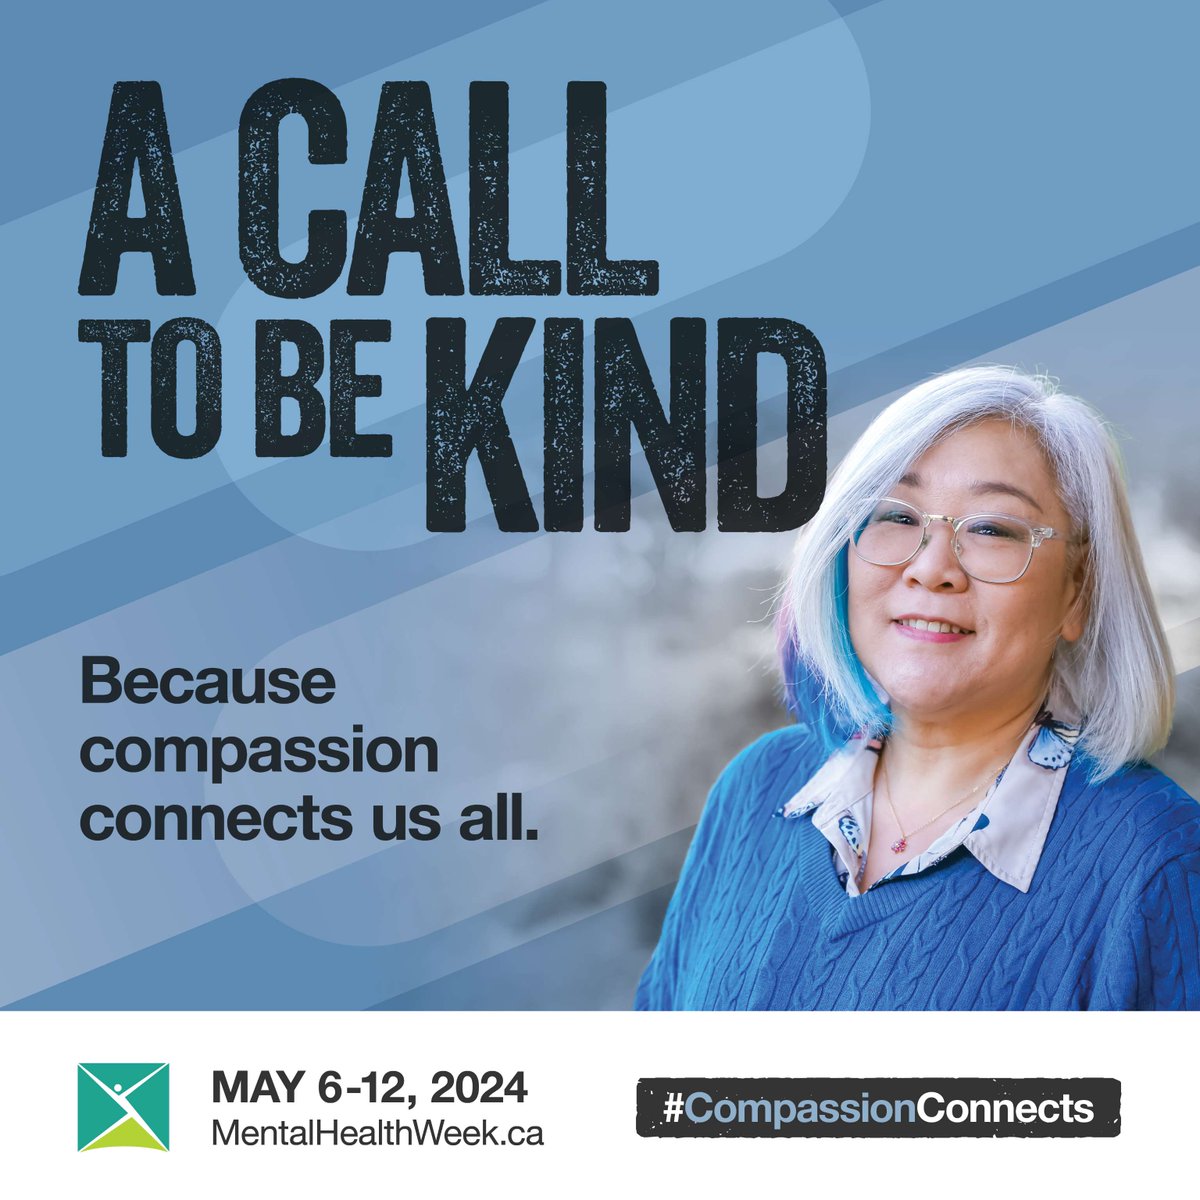 This year’s #MentalHealthWeek is all about compassion! Learn more and join the Canadian Mental Health Association (CMHA) in a conversation about how #CompassionConnects. ow.ly/fTgk50RystJ